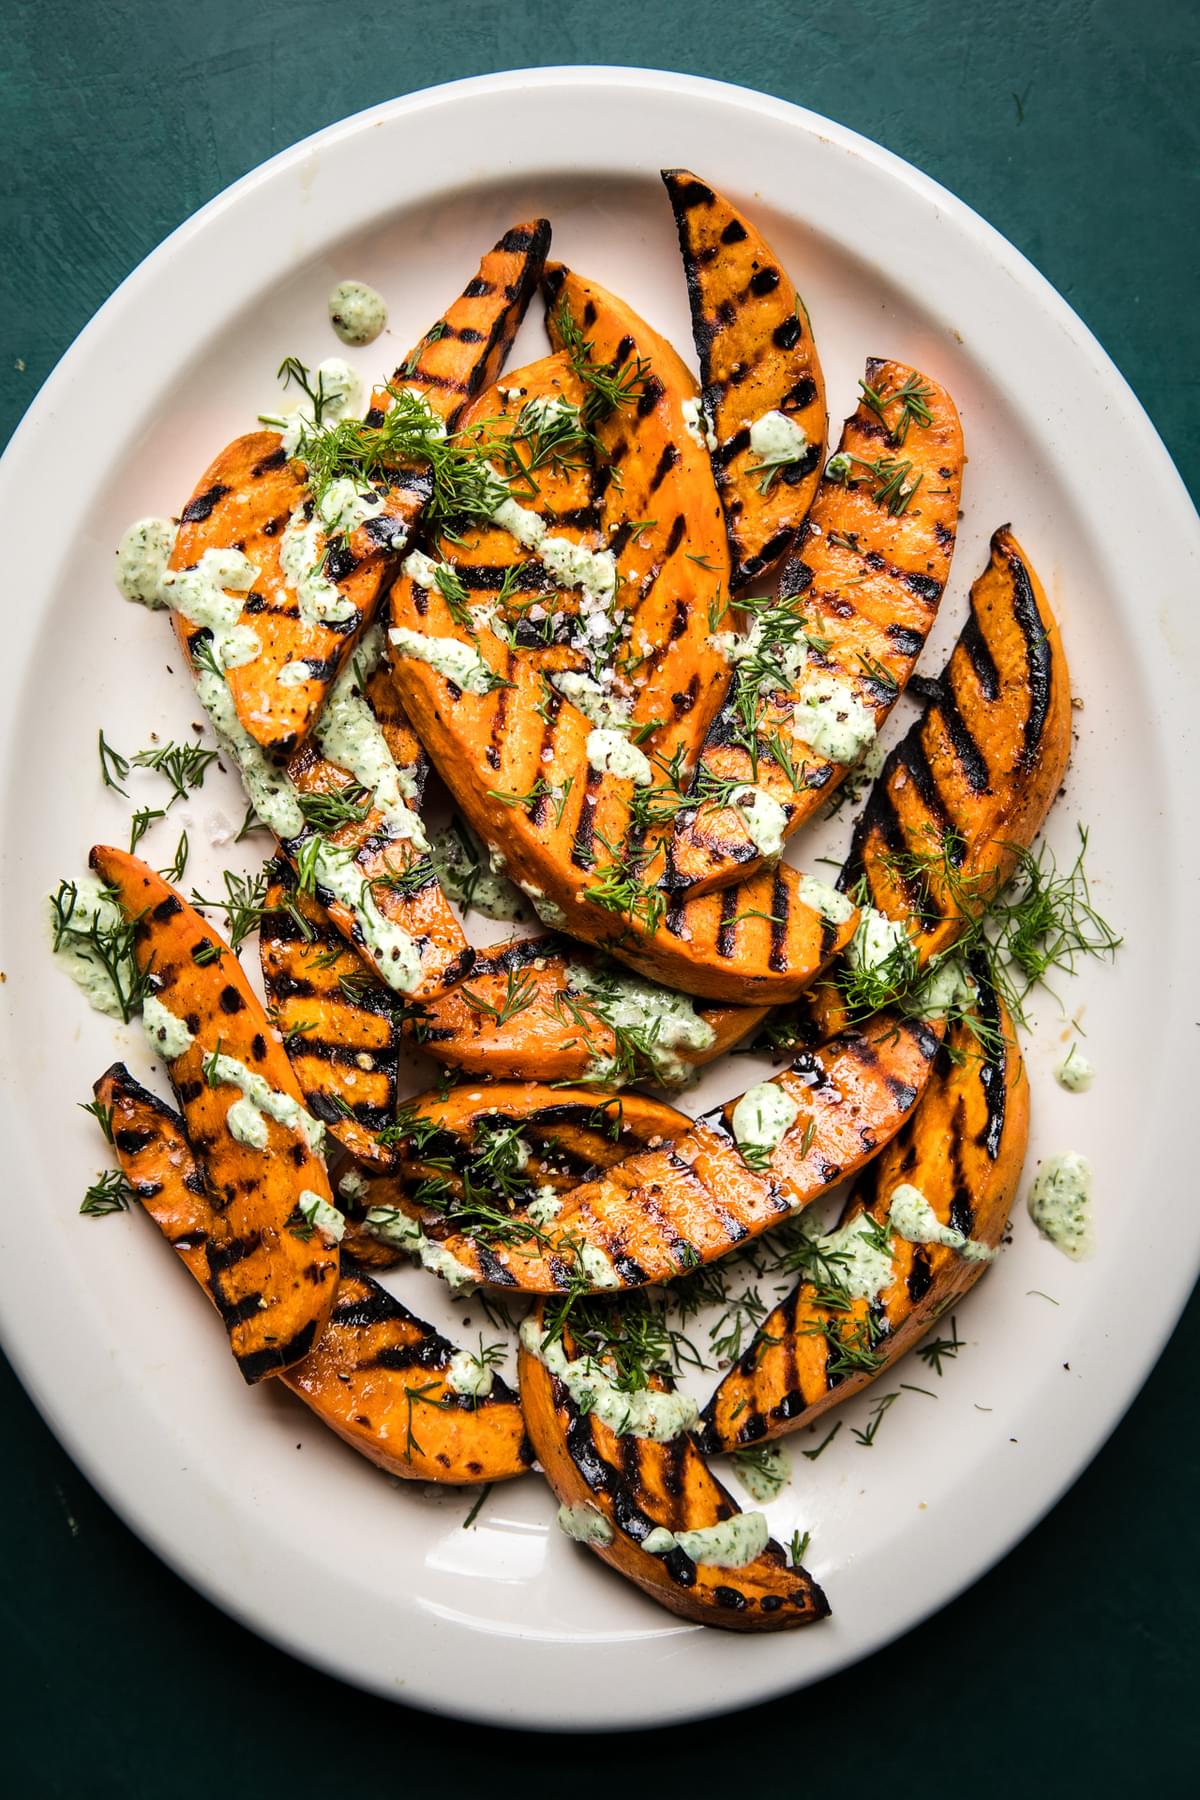 Grilled Sweet potatoes with olive oil and sea salt on a plate drizzled with a basil & dill yogurt sauce